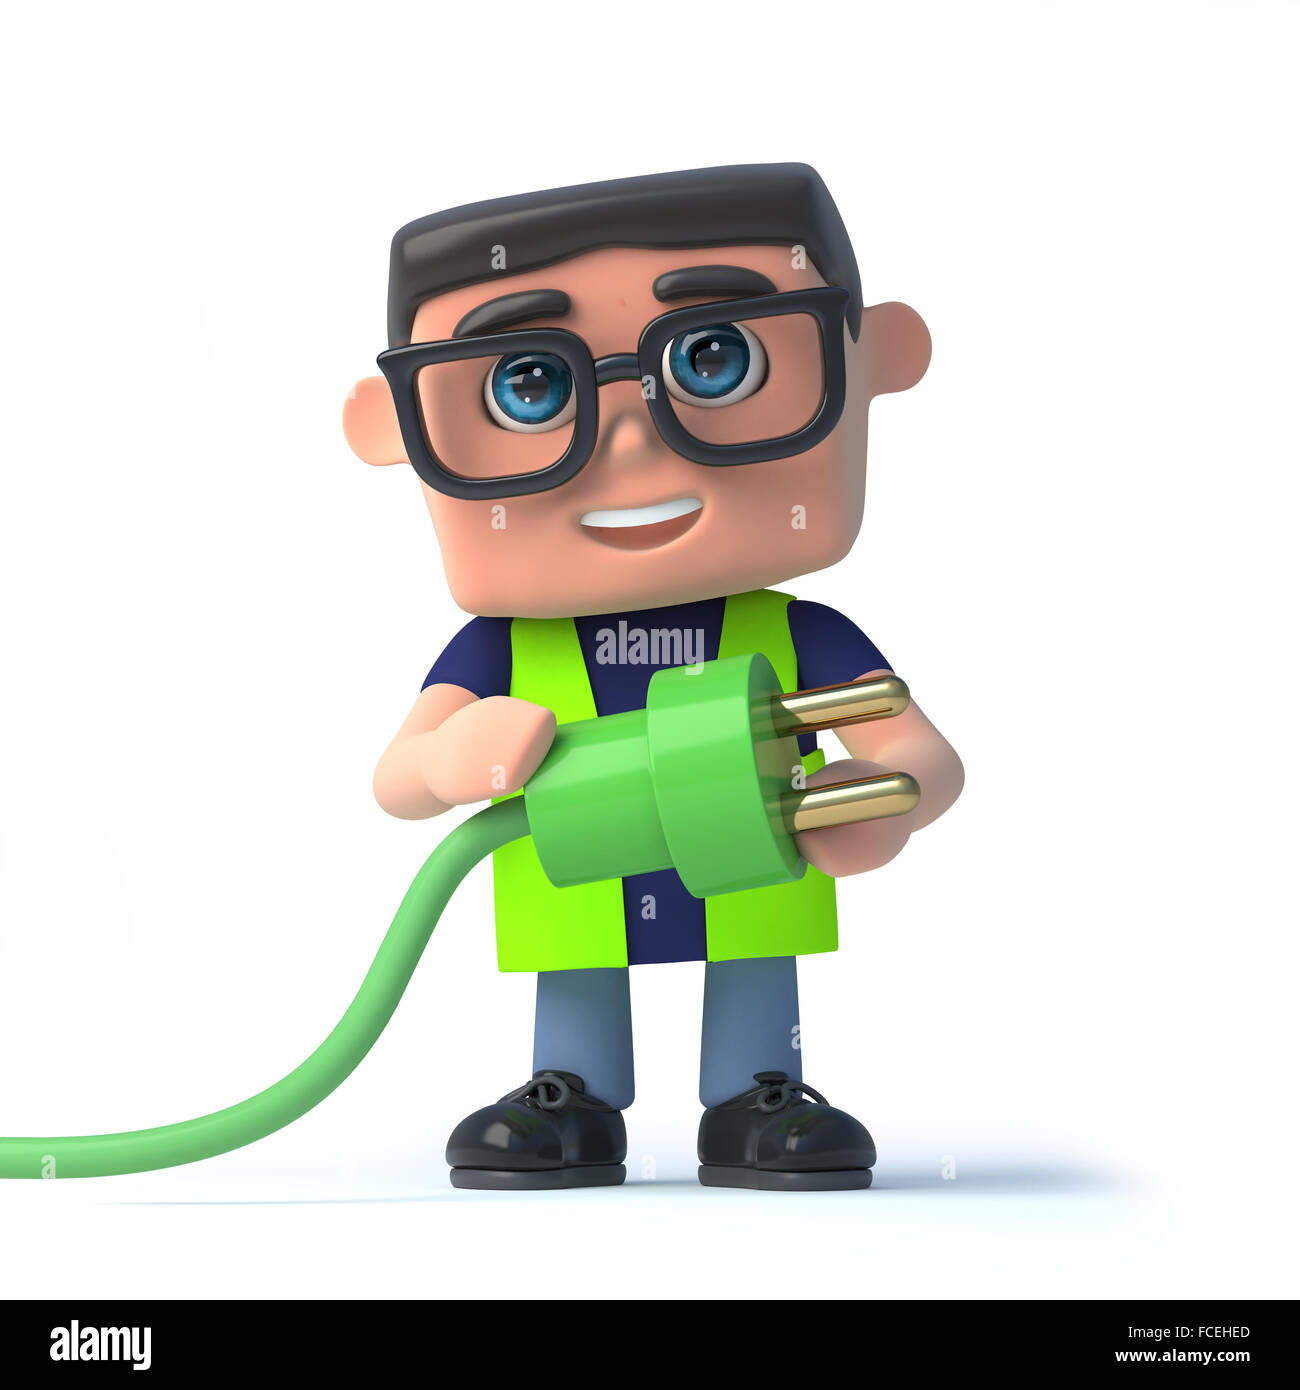 3d render of a health and safety officer holding a green power lead and plug. Stock Photo